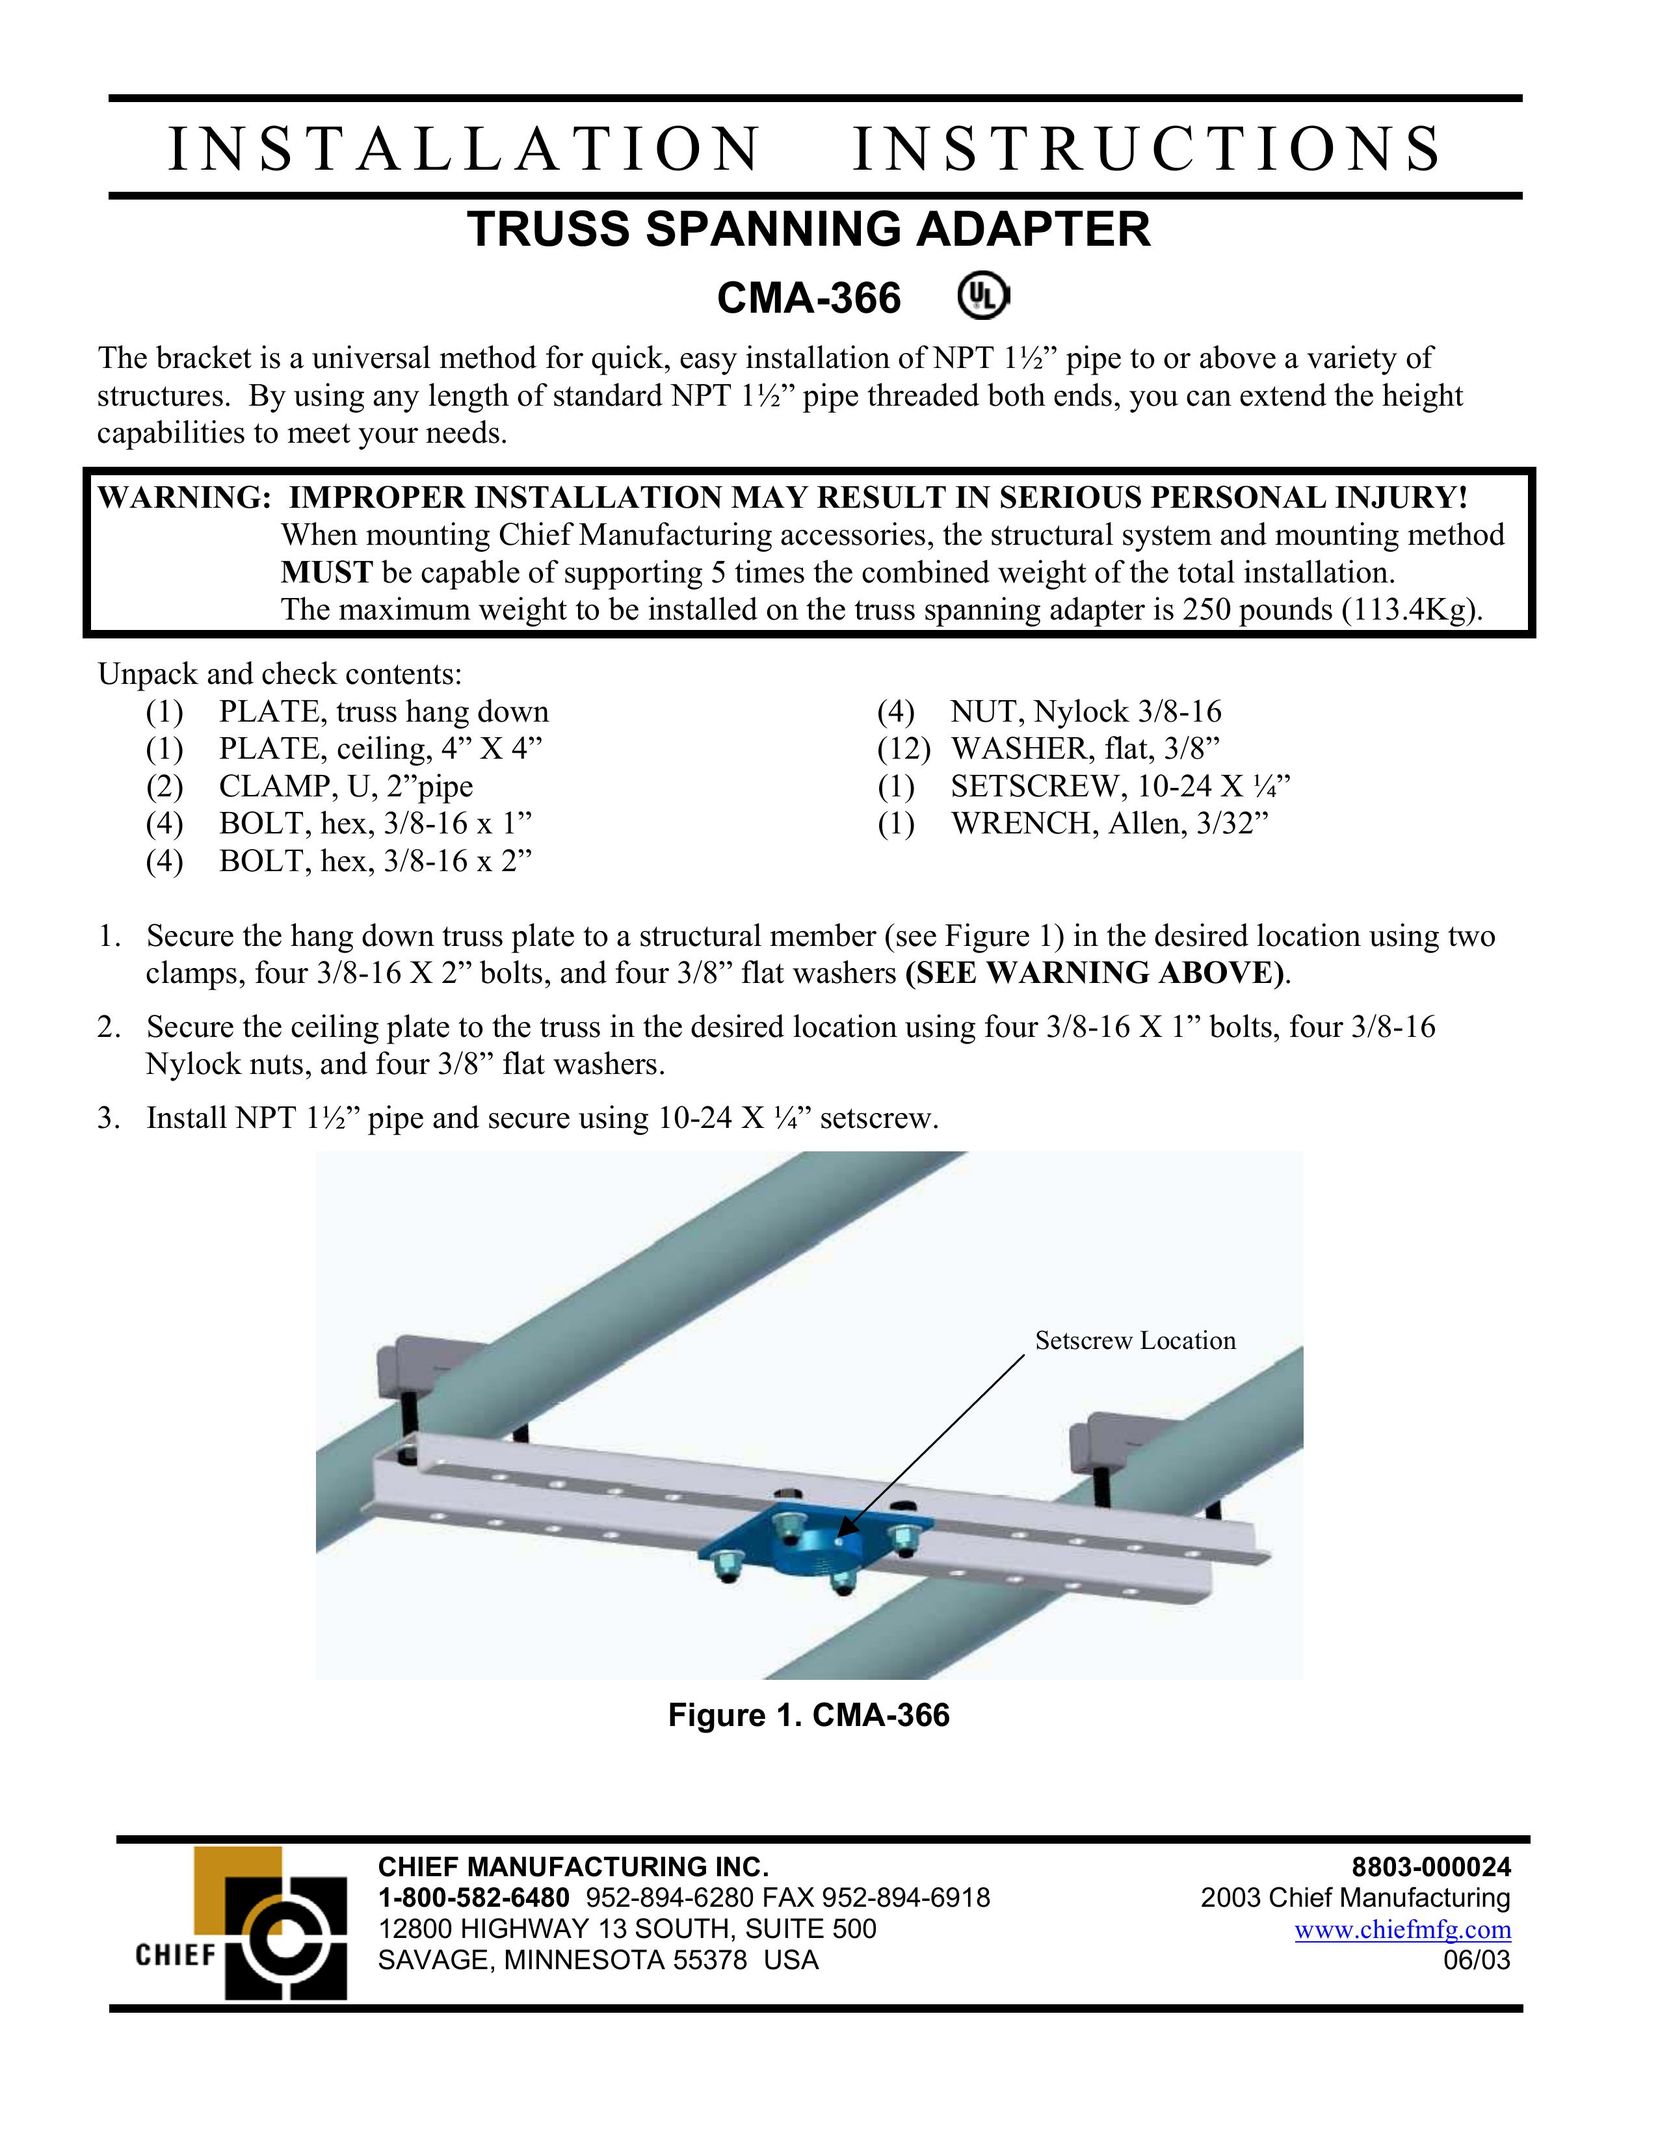 Chief Manufacturing CMA-366 Network Card User Manual